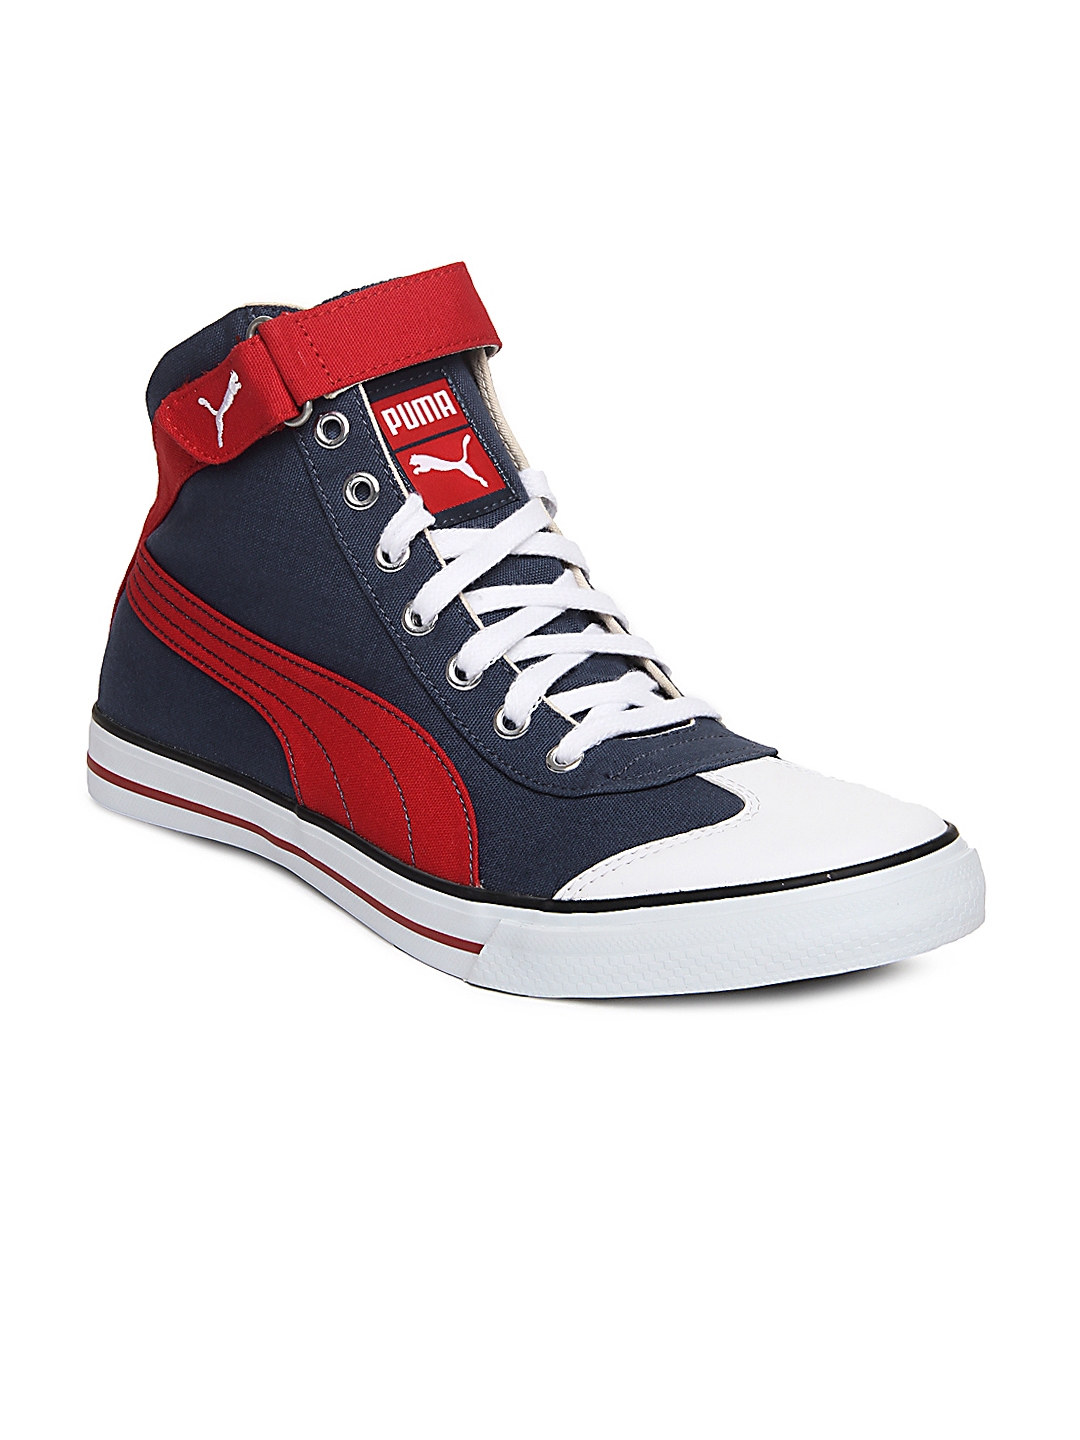 puma 917 mid 2.0 ind sneakers myntra